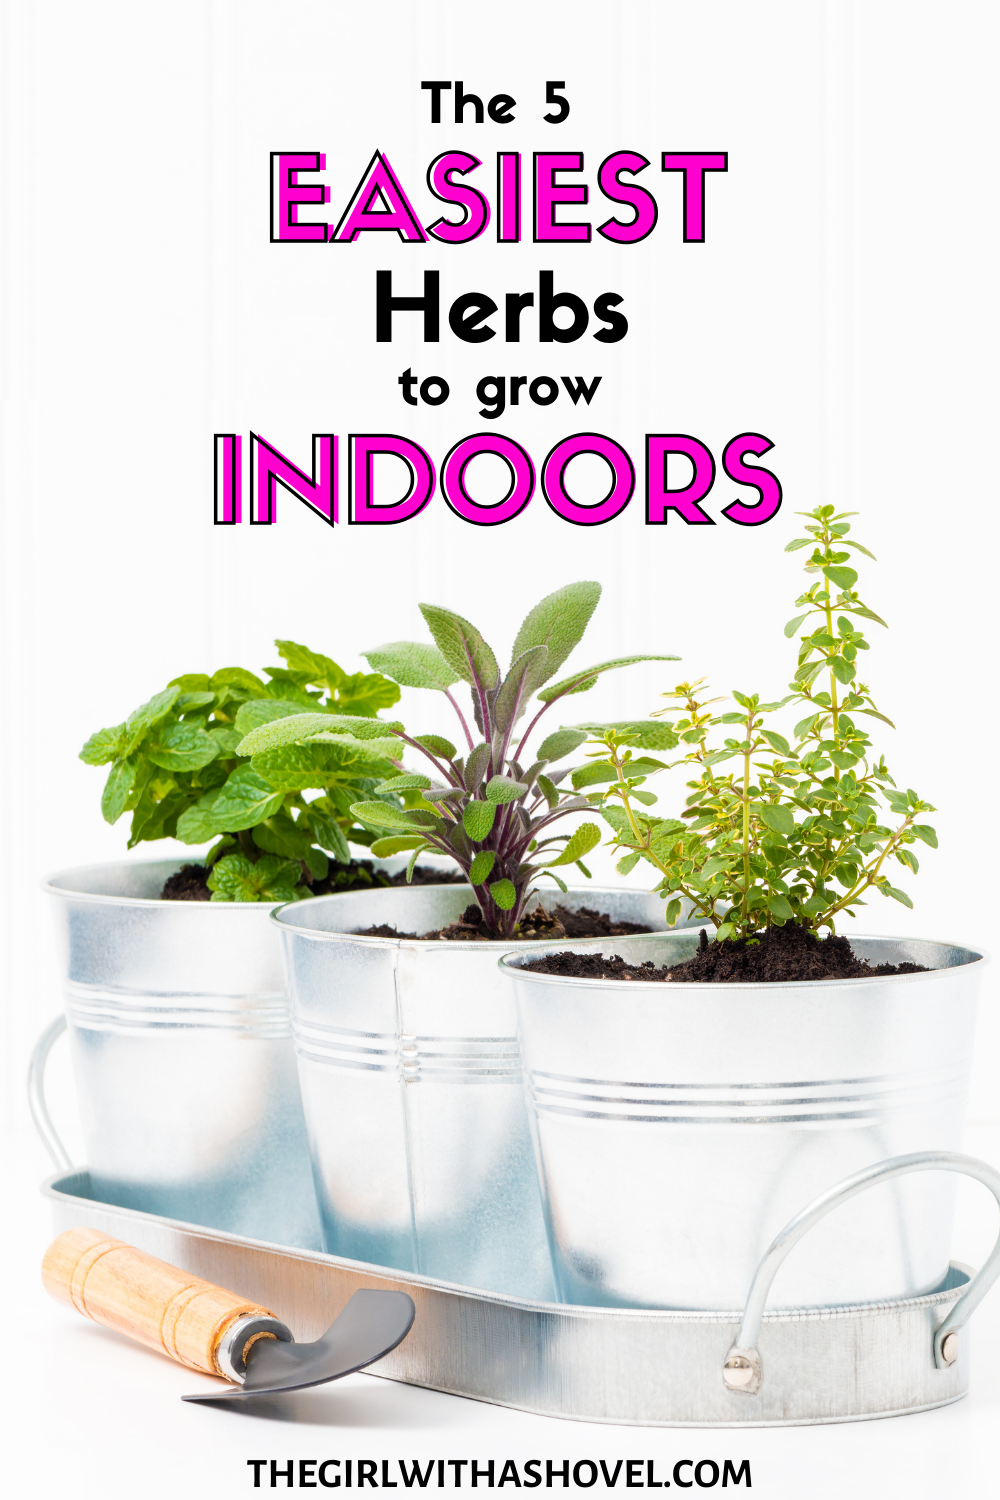 The 5 easiest herbs to grow indoors cover picture